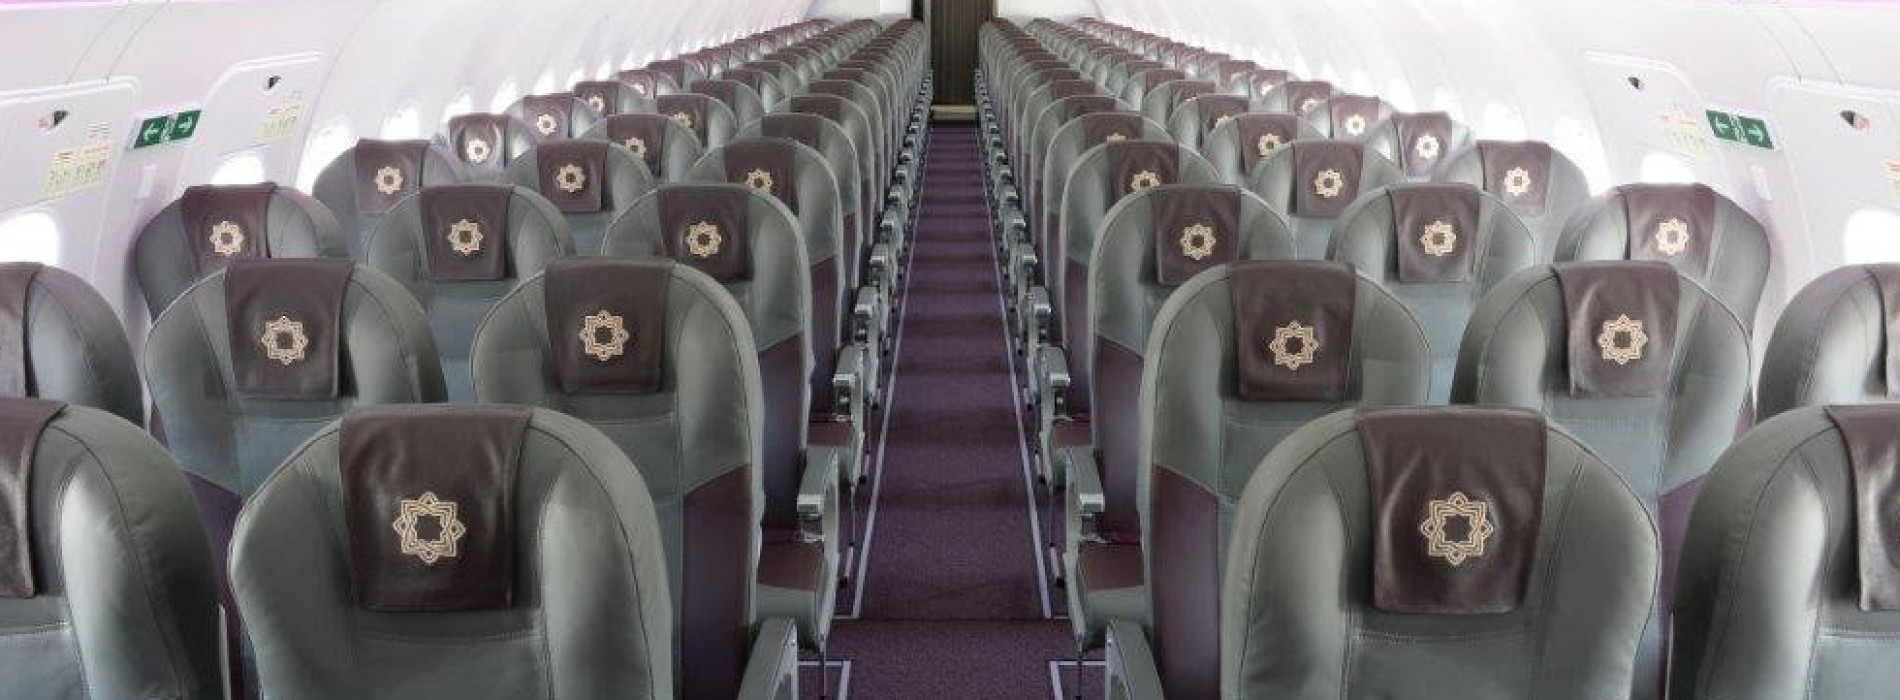 Vistara takes delivery of its first Airbus A320neo today says its #NotJustAnotherNeo